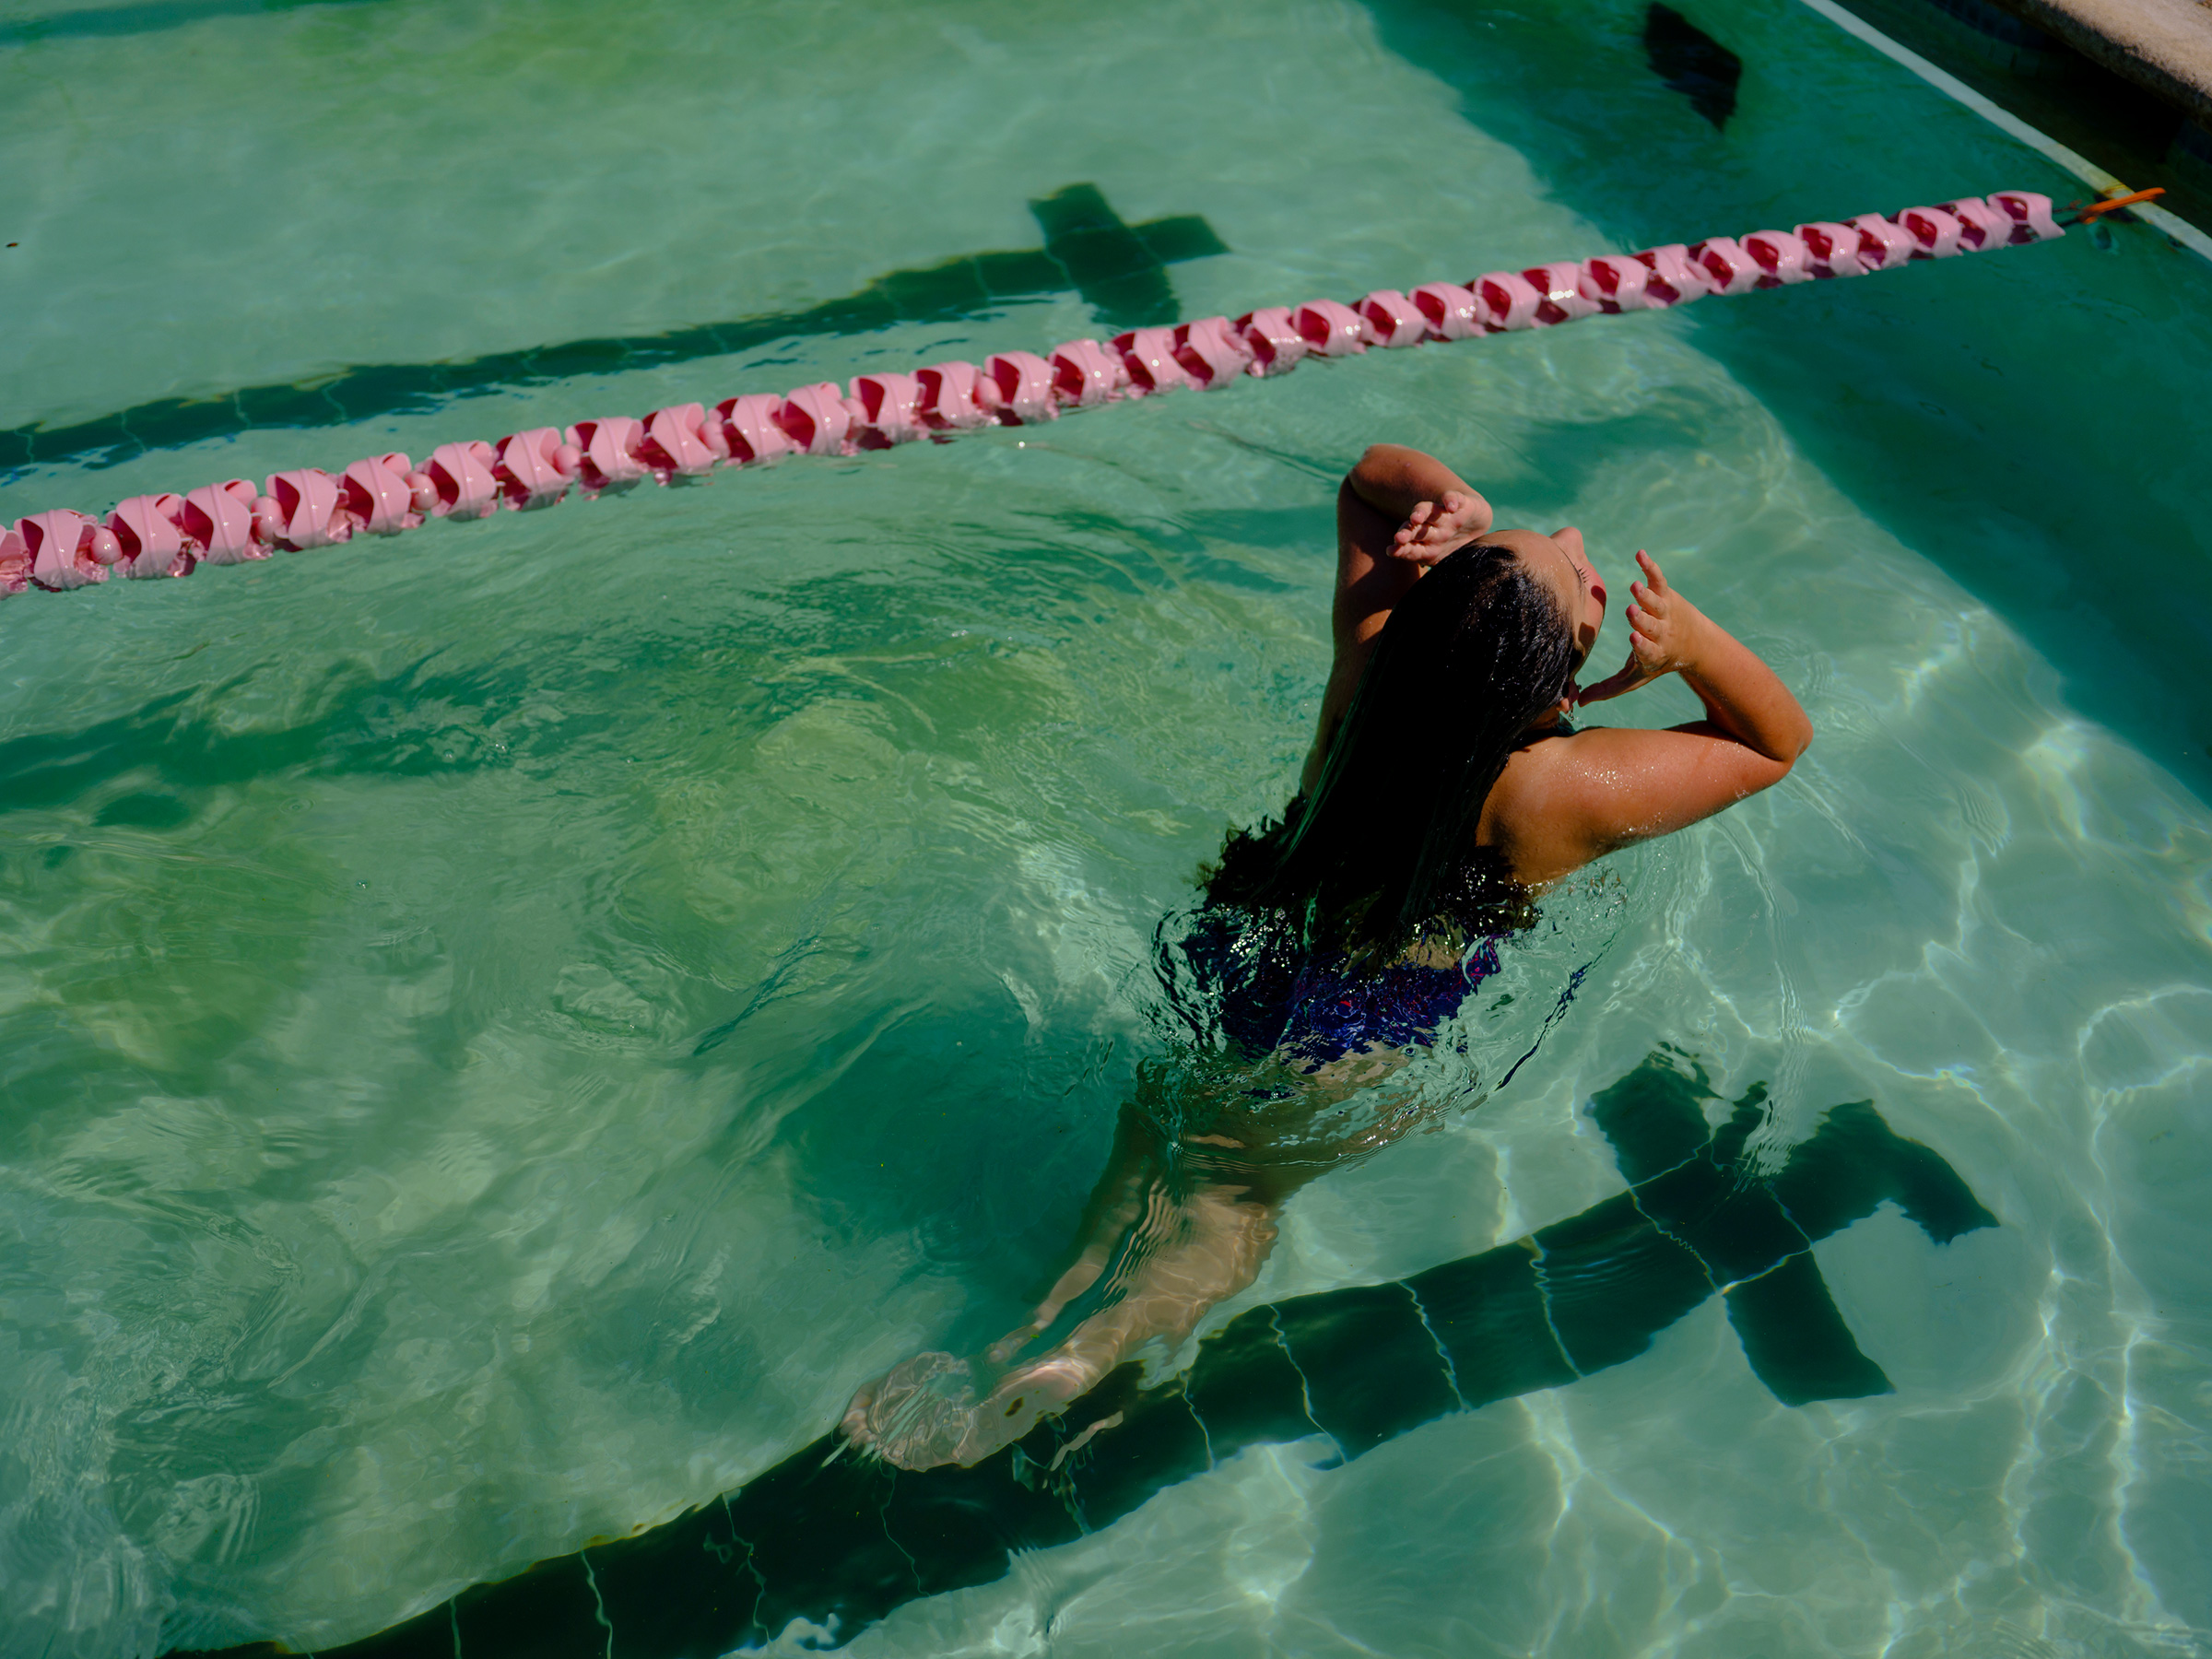 Maya, 11, swims in Houston on May 10. State law prohibits Maya from playing girls’ sports in school, but she swims on a private team. It’s not the first time <a href="https://time.com/6184659/trans-youth-gender-expansive-photo-essay/">being trans</a> has prevented her from competing—she quit gymnastics years ago because she didn’t want to risk disqualifying her teammates. The experience made her “mad and sad,” she says. But she finds swimming on her new team “really fun and relaxing.” (Annie Flanagan for TIME)